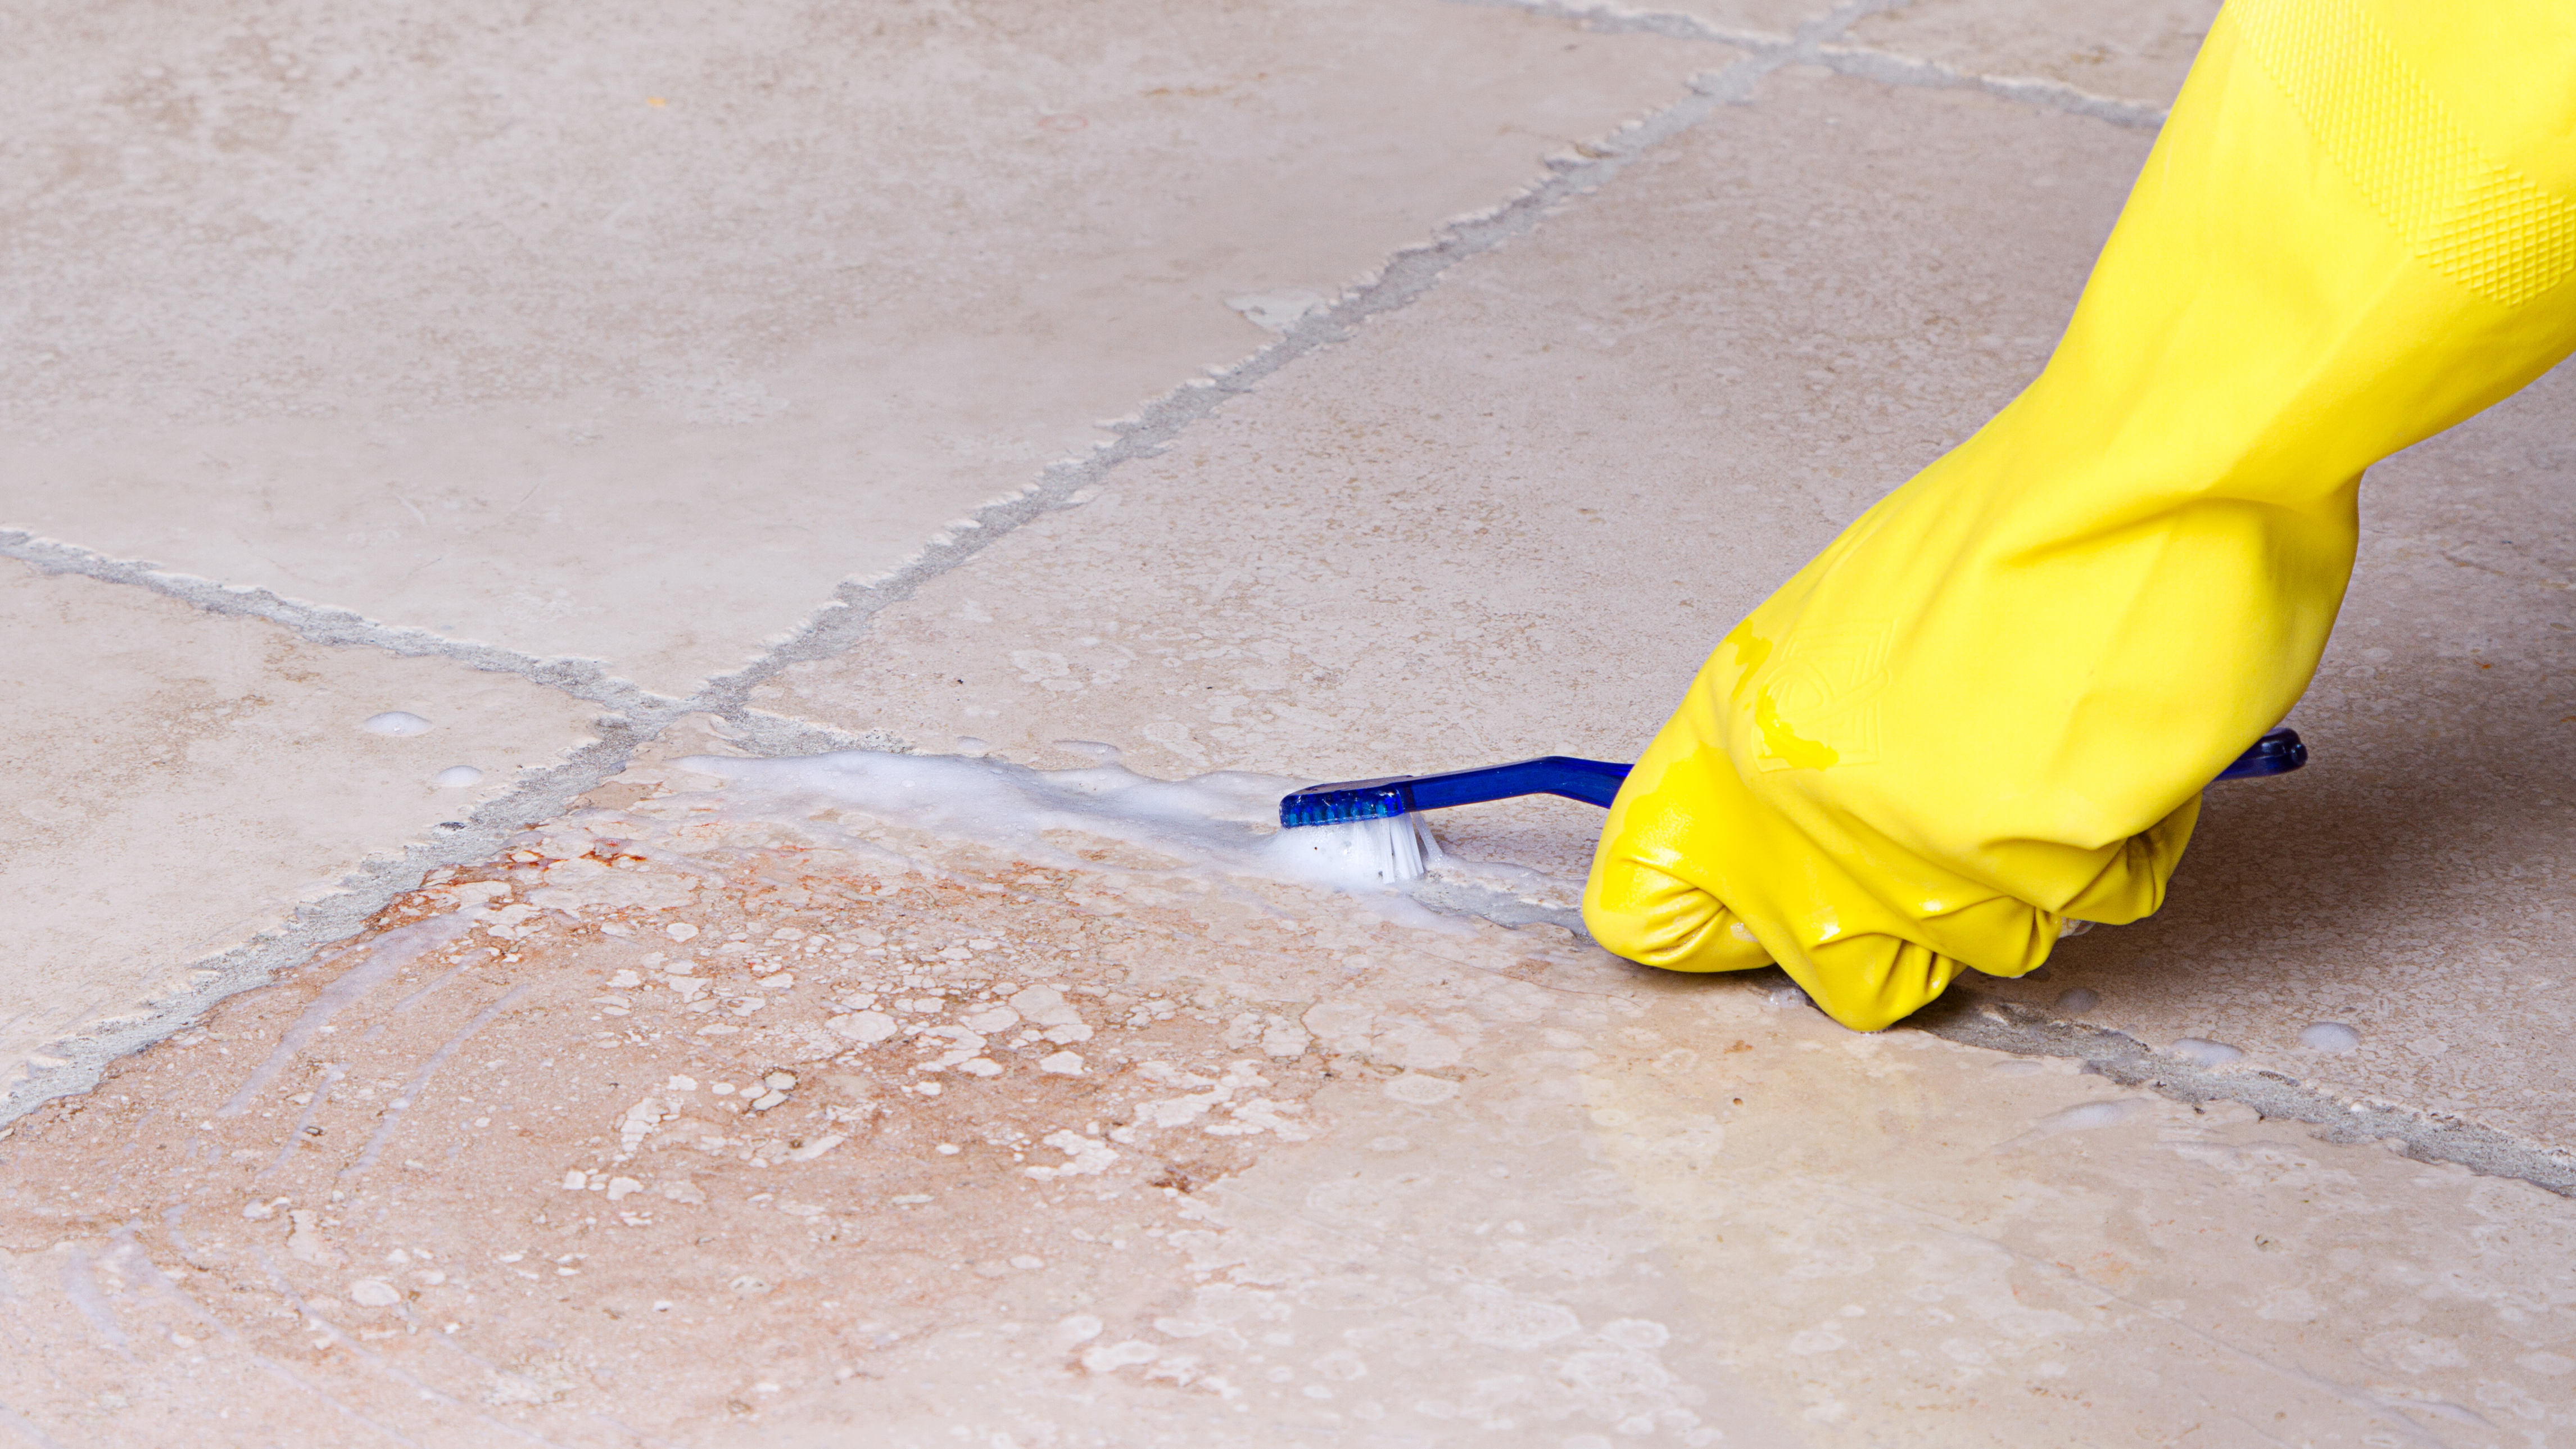 How To Clean Grout On Floor Tiles, How To Clean Floor Tile Grout With Baking Soda And Vinegar